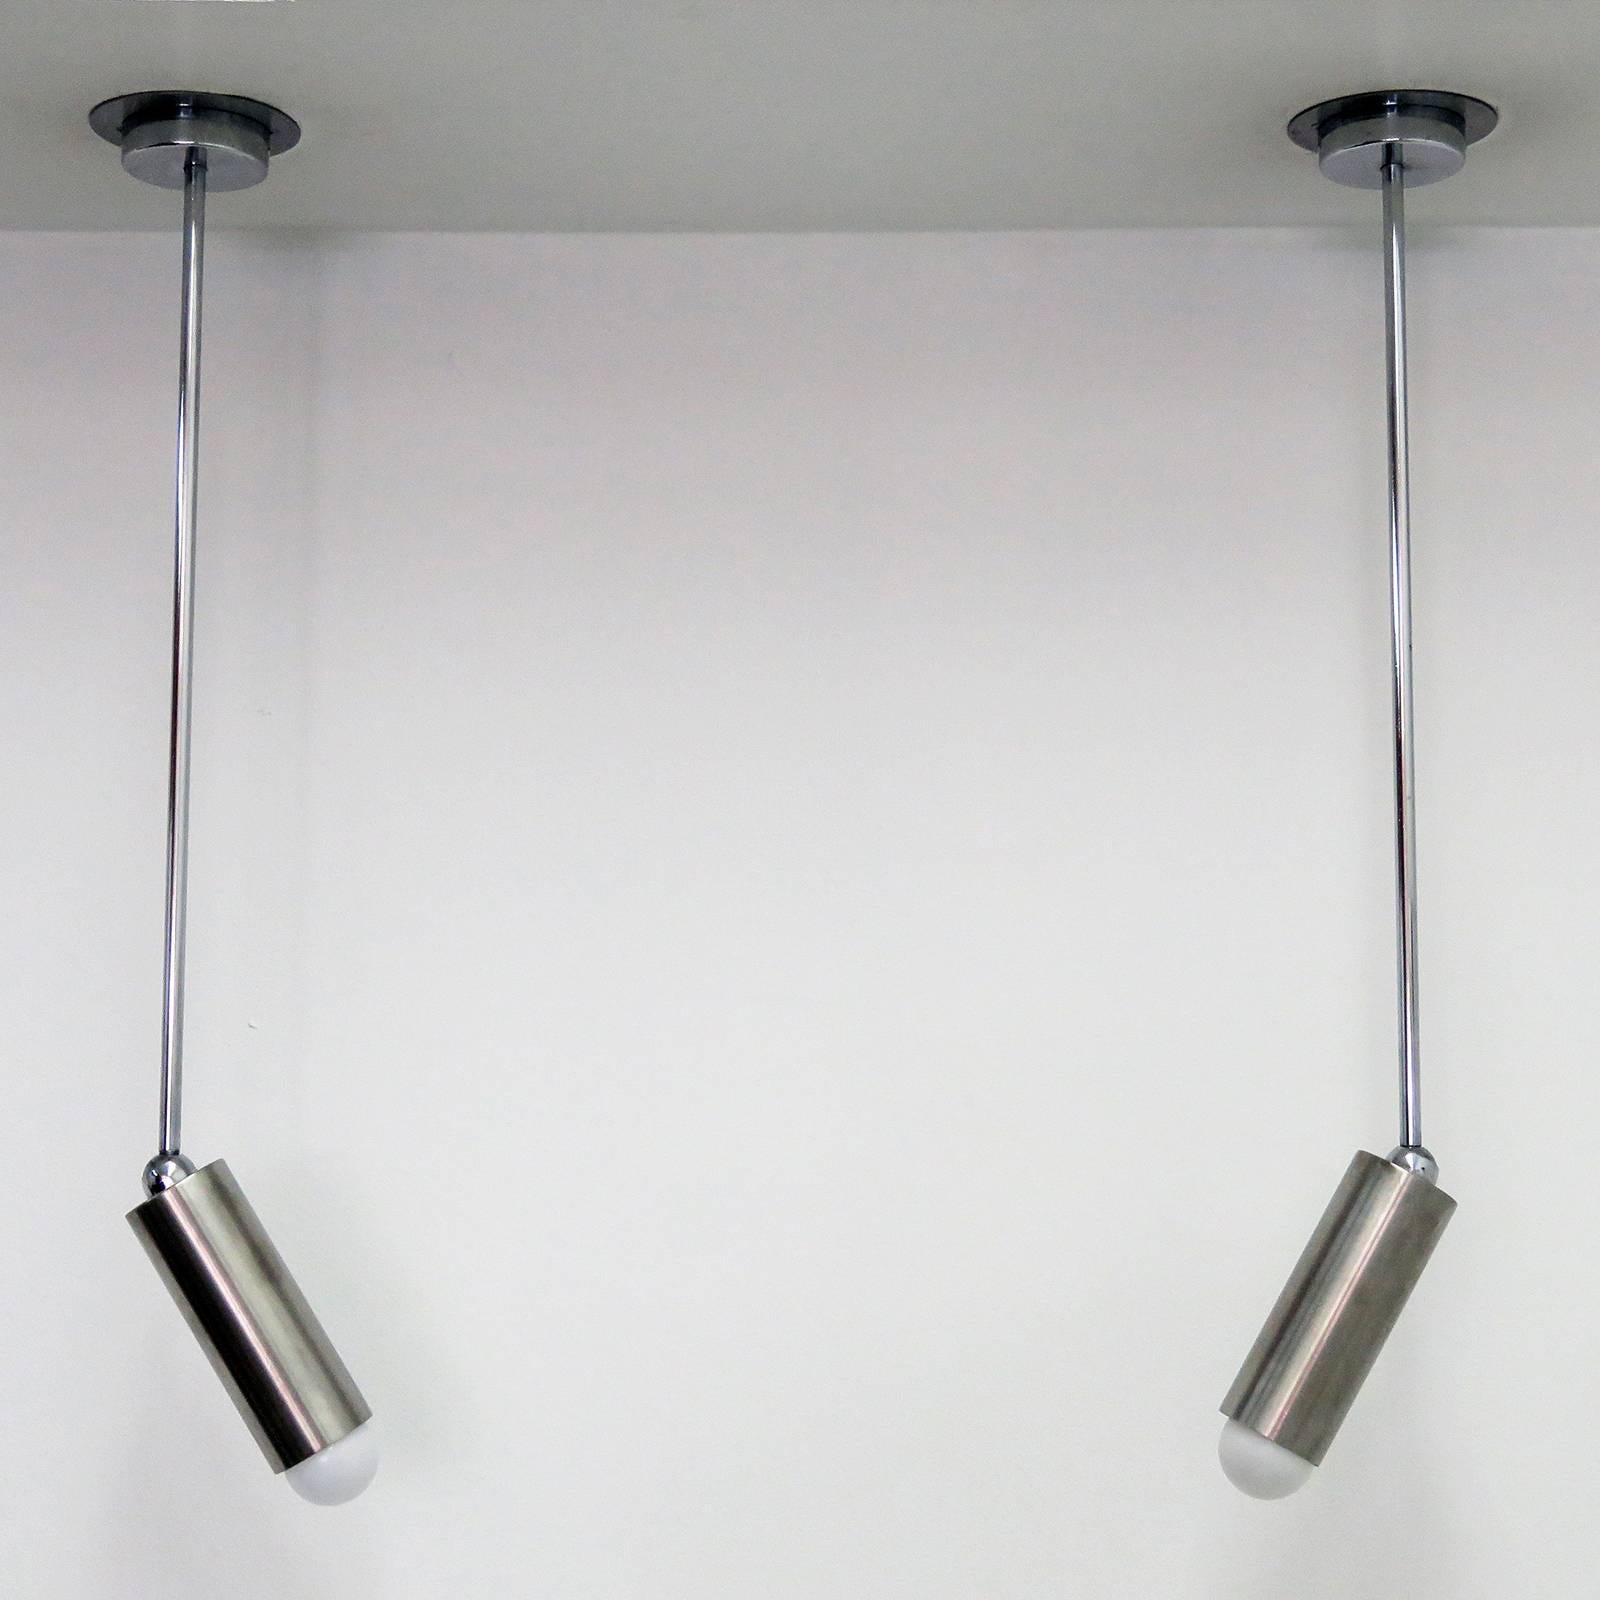 Striking pair of French long stem wall/ceiling lights by Parscot, brushed aluminium bodies on a ball joint for Directional lighting.